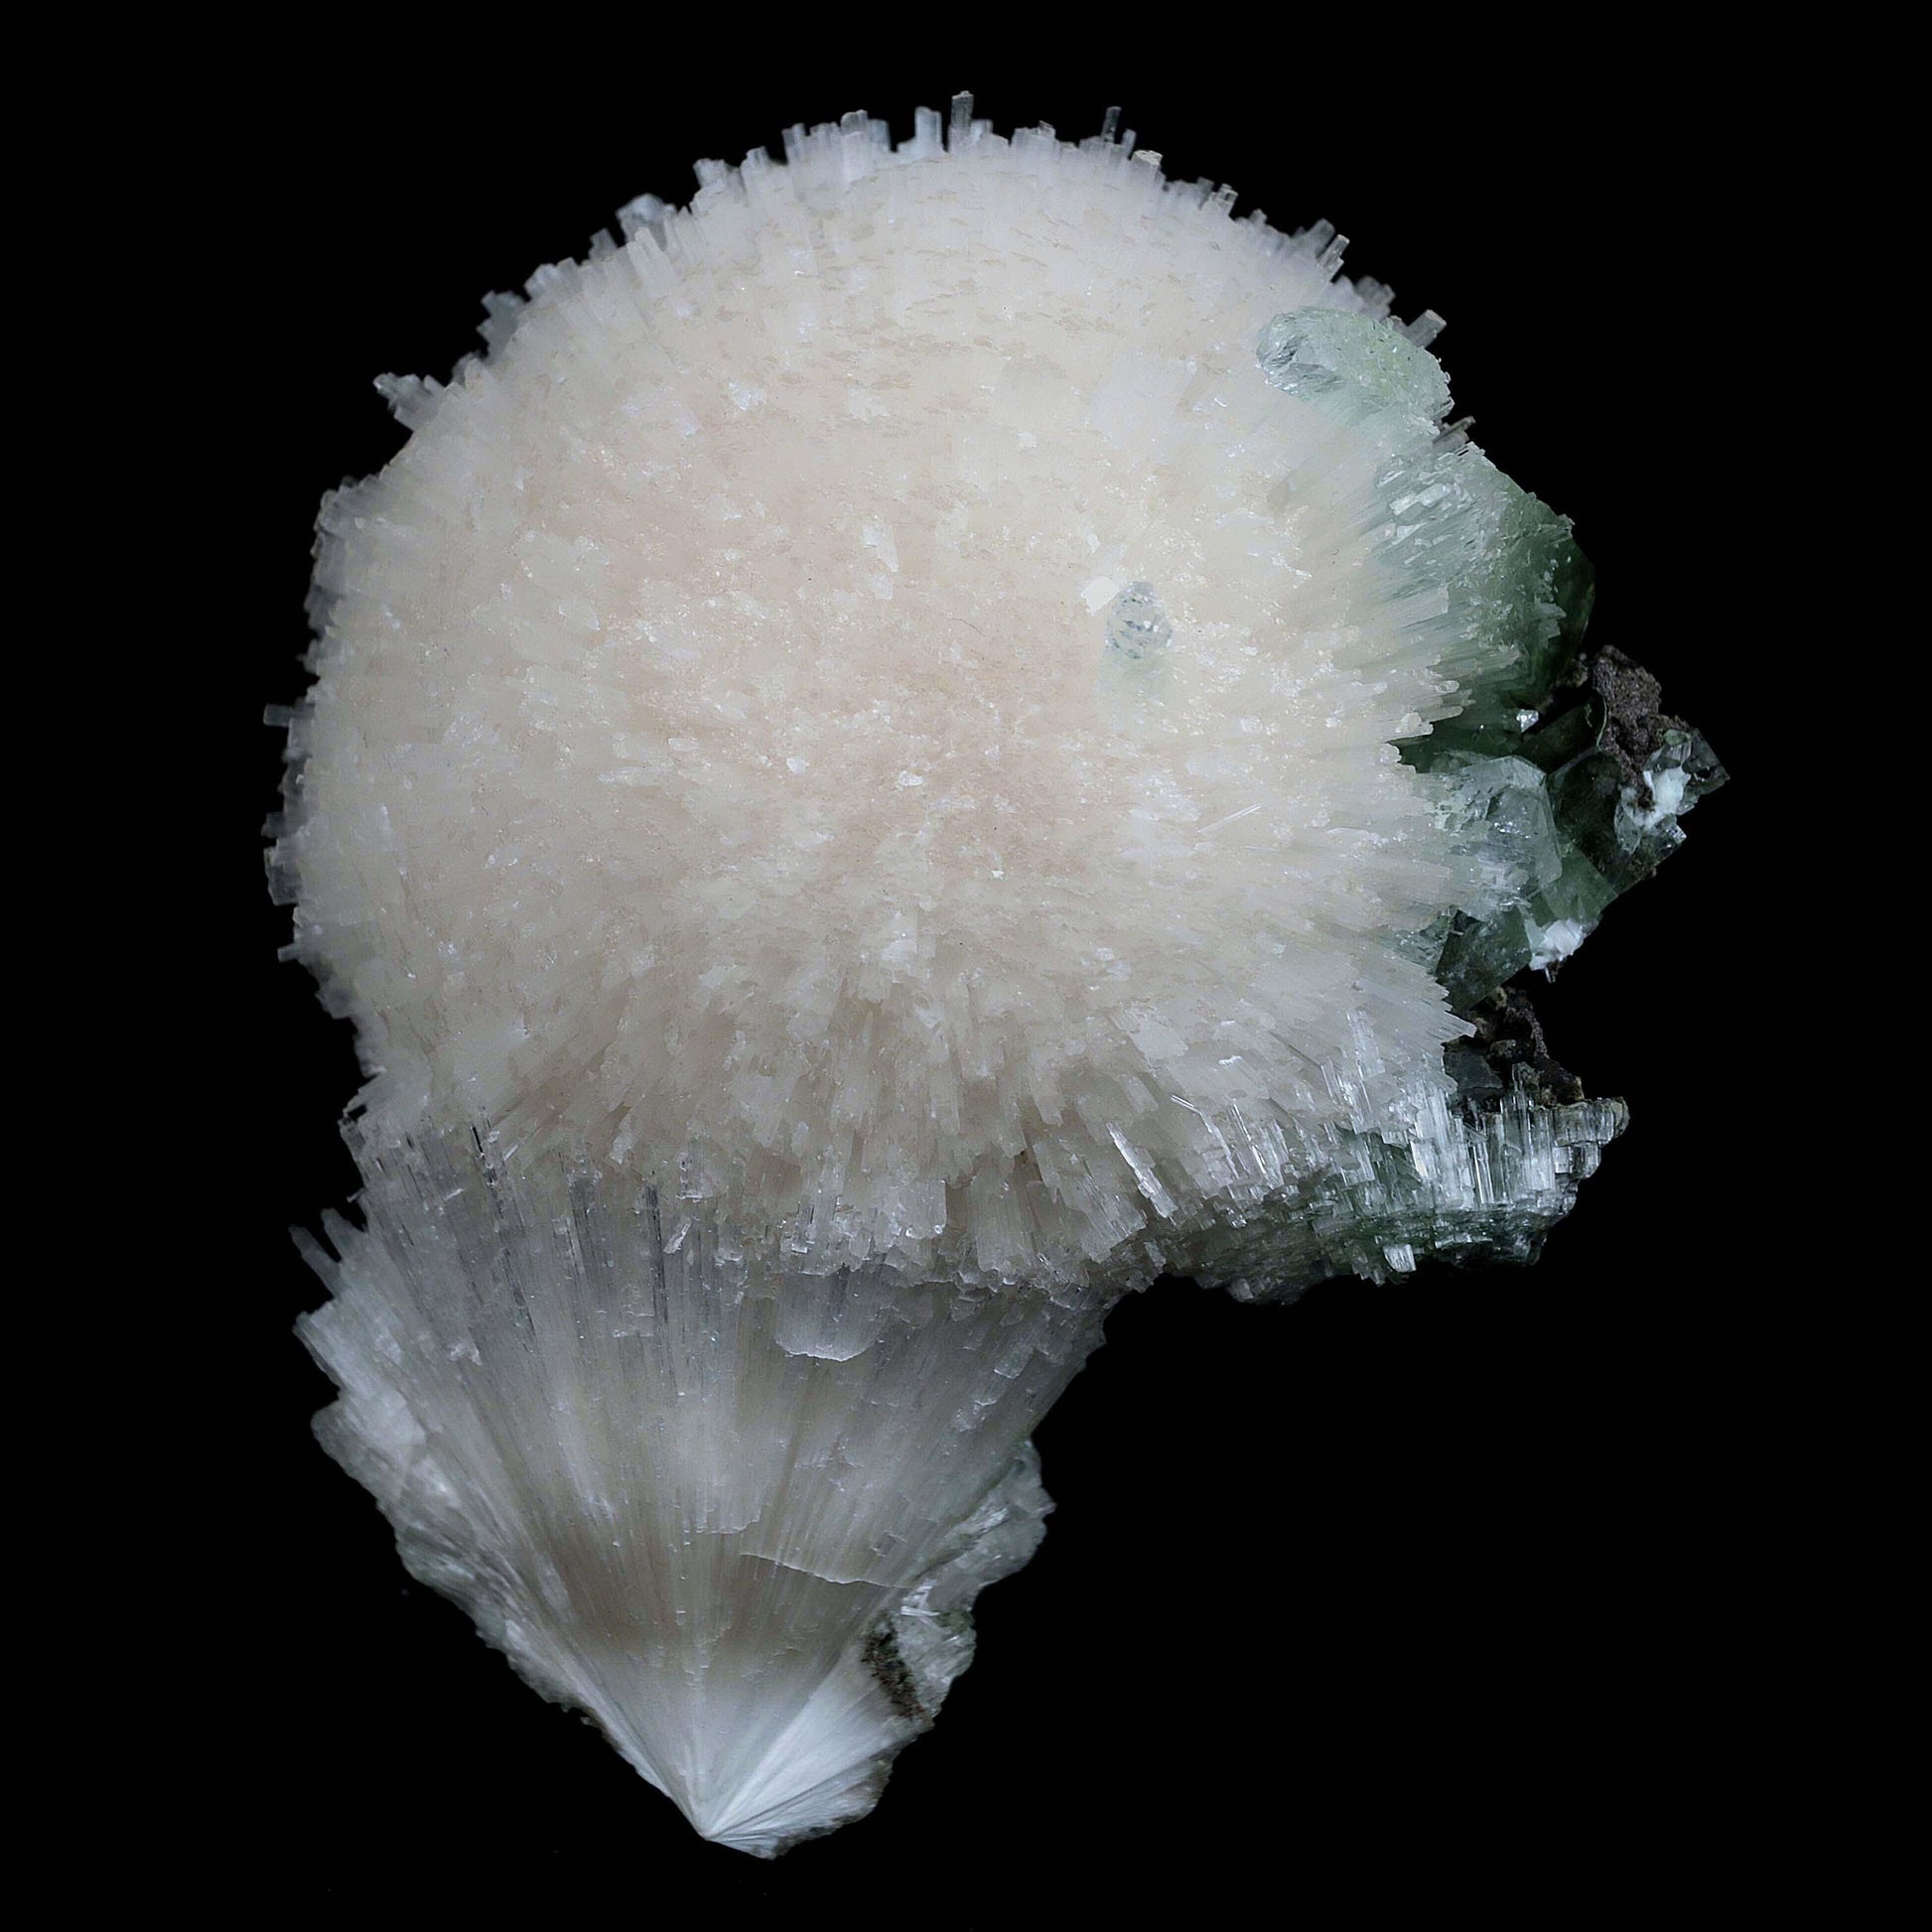 Scolecite Galssy Spehere with Apophyllite Natural Mineral Specimen # …  https://www.superbminerals.us/products/scolecite-galssy-spehere-with-apophyllite-natural-mineral-specimen-b-4609  Features: A rich porcupine quill spray of glassy scolecite needles is artfully placed over a basalt substrate coated in mint-green, frosted Tetragonal Apophyllite crystals.Large combination material that is both exceptional and uncommon in today's market. Primary Mineral(s): Scolecite